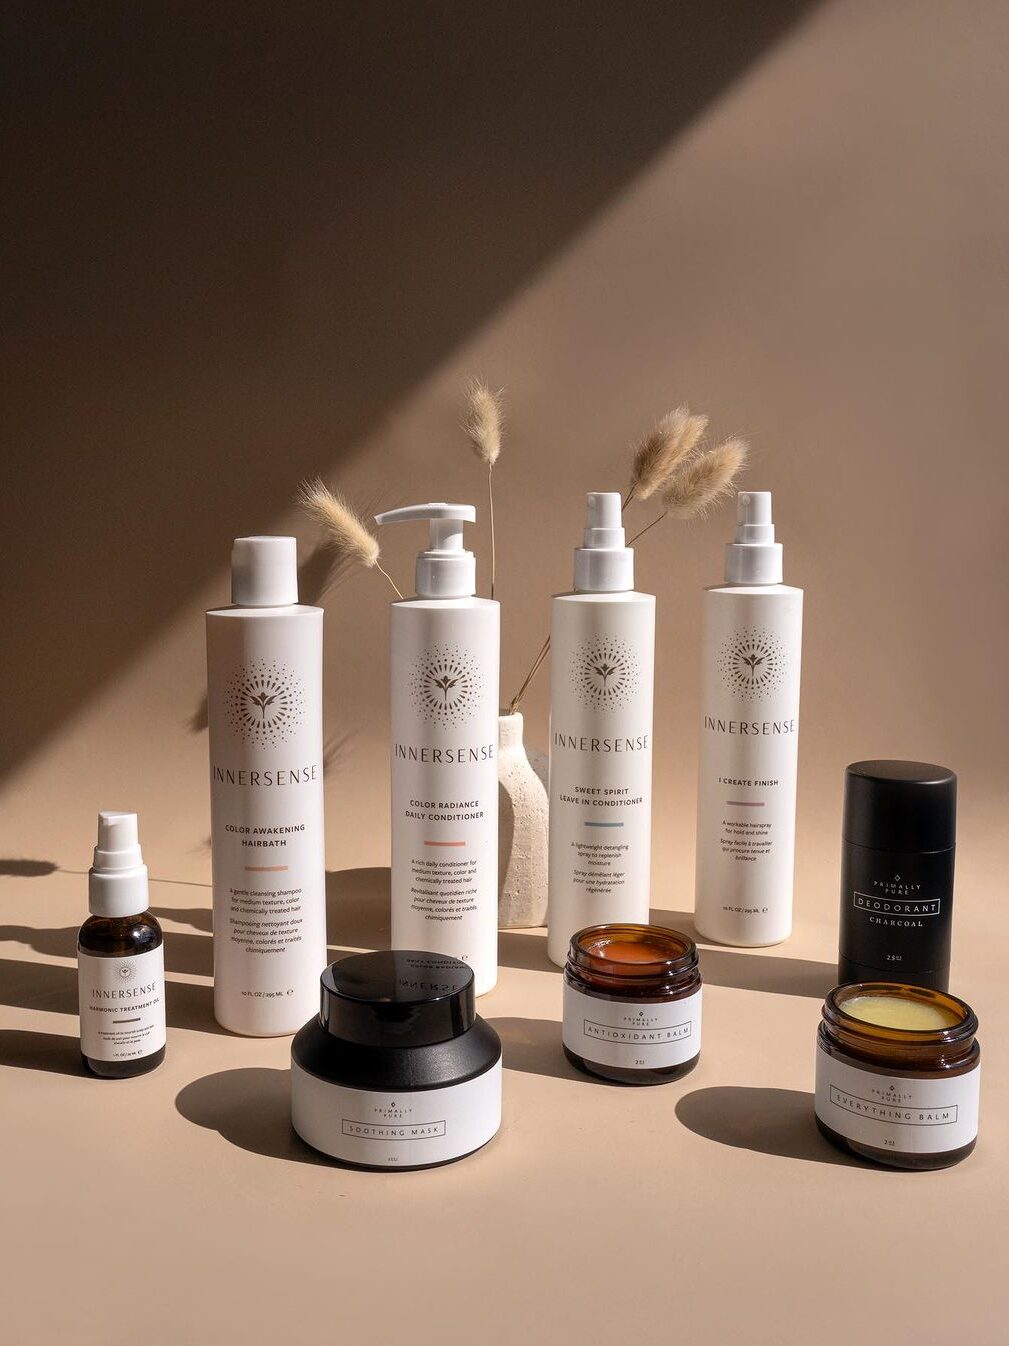 A studio shot of popular Innersense hair products.